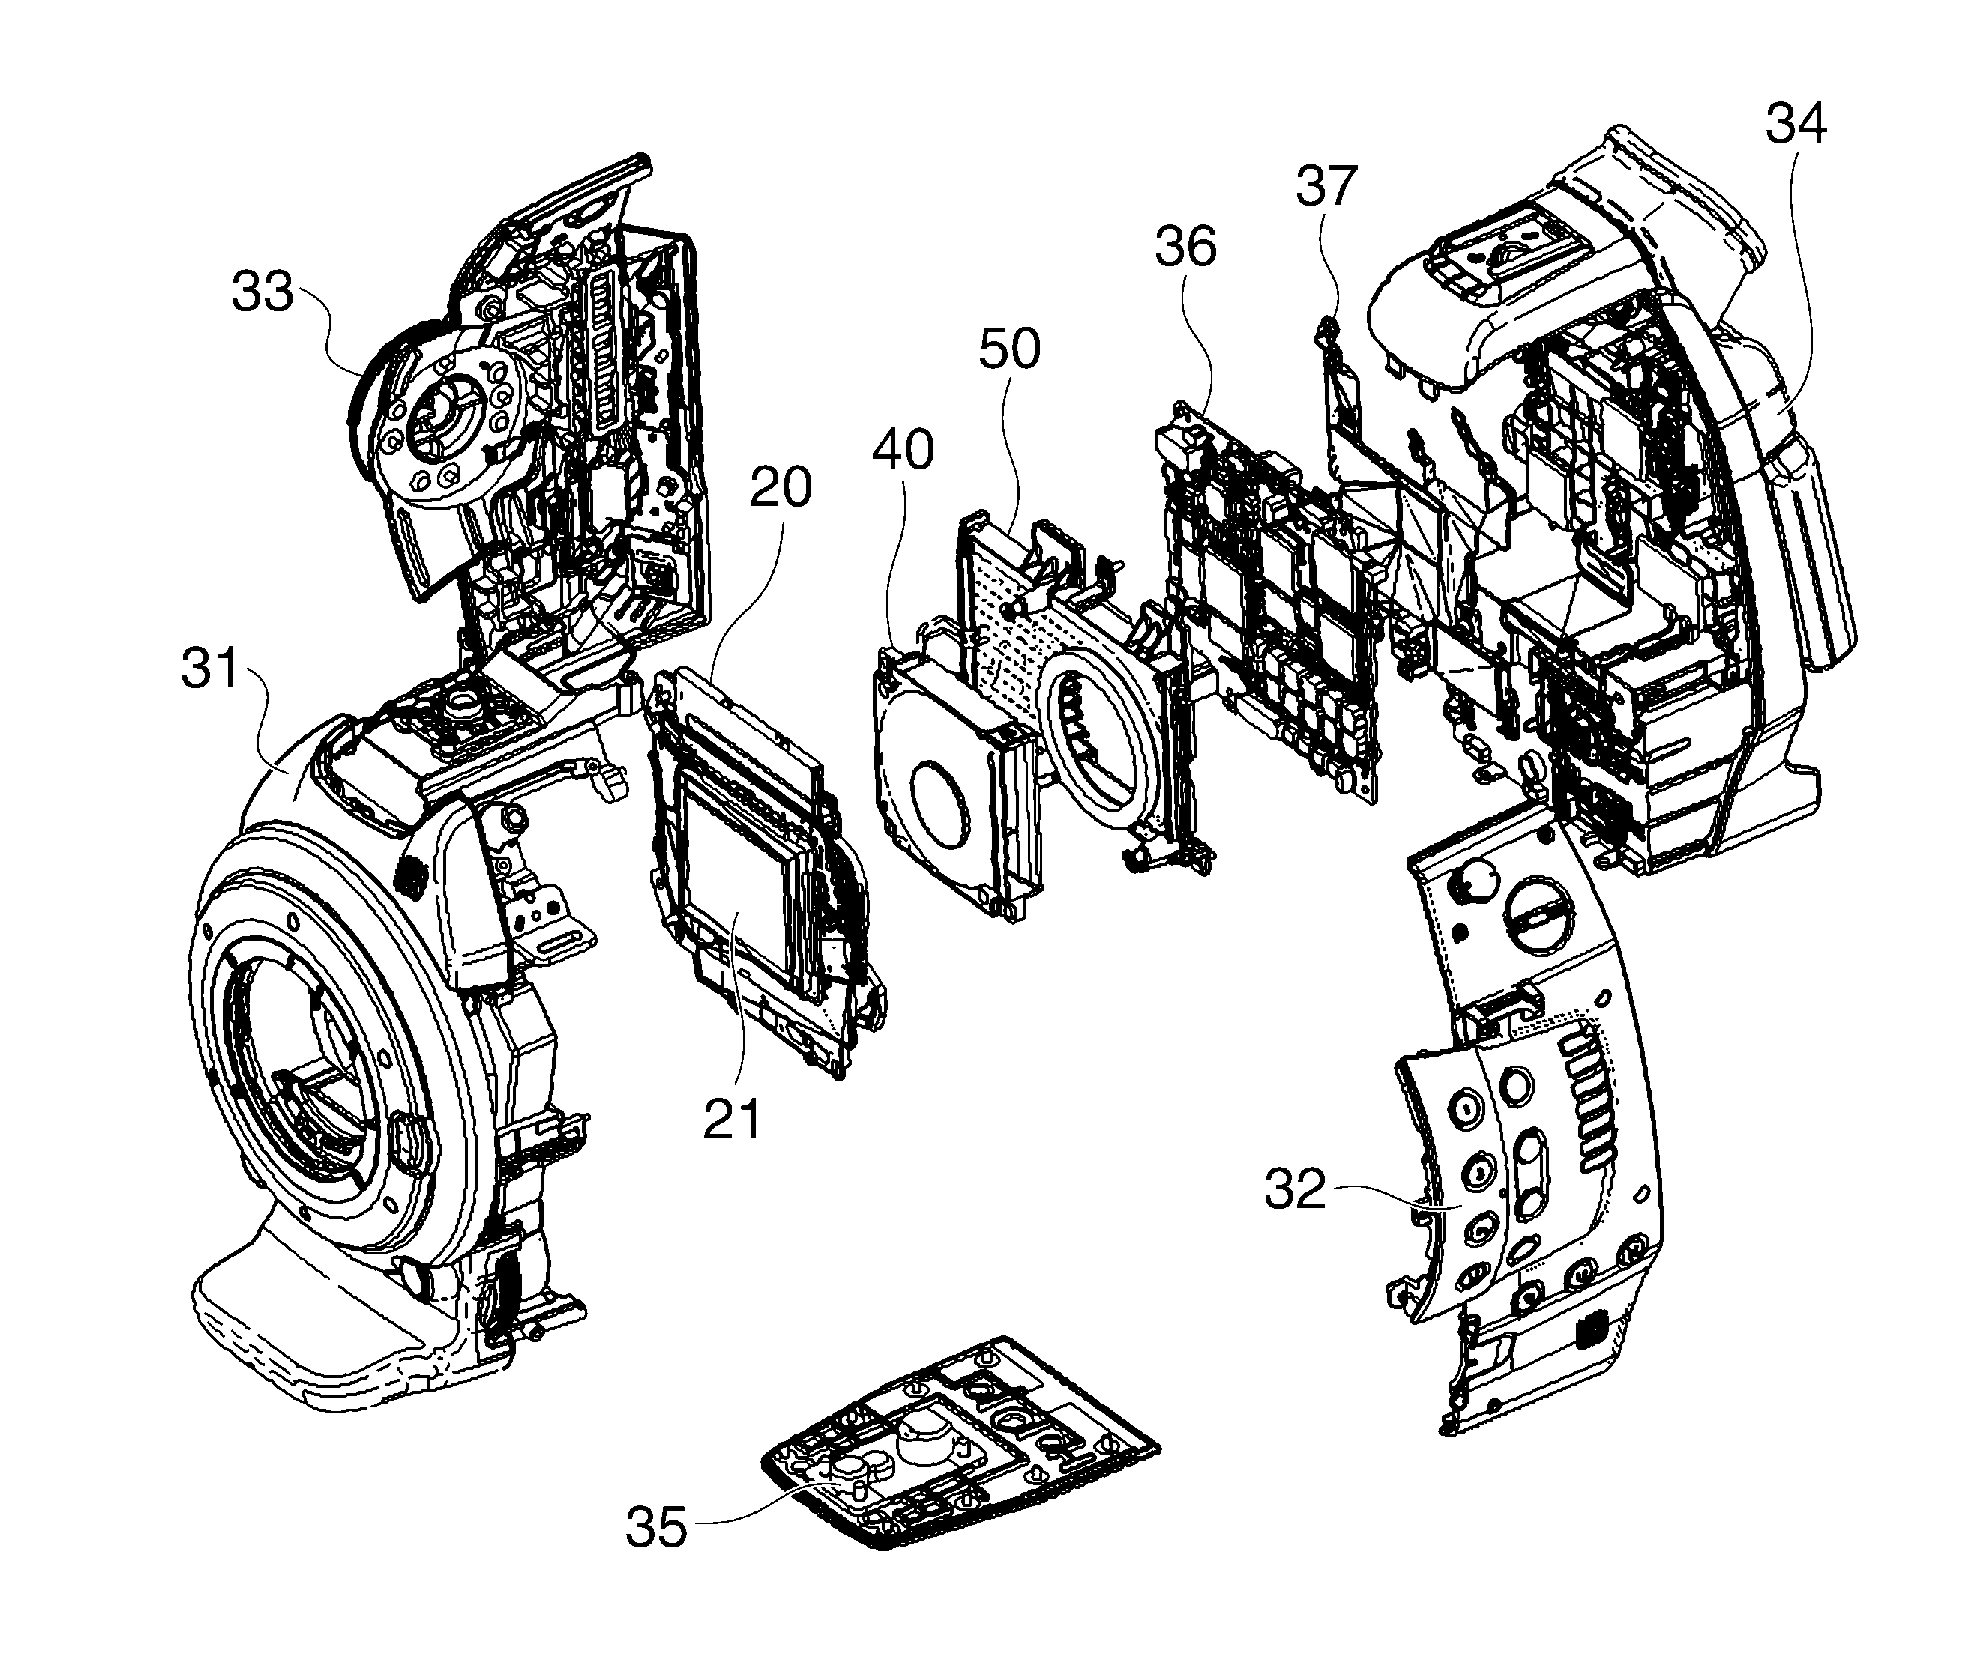 Image pickup apparatus with air cooling unit